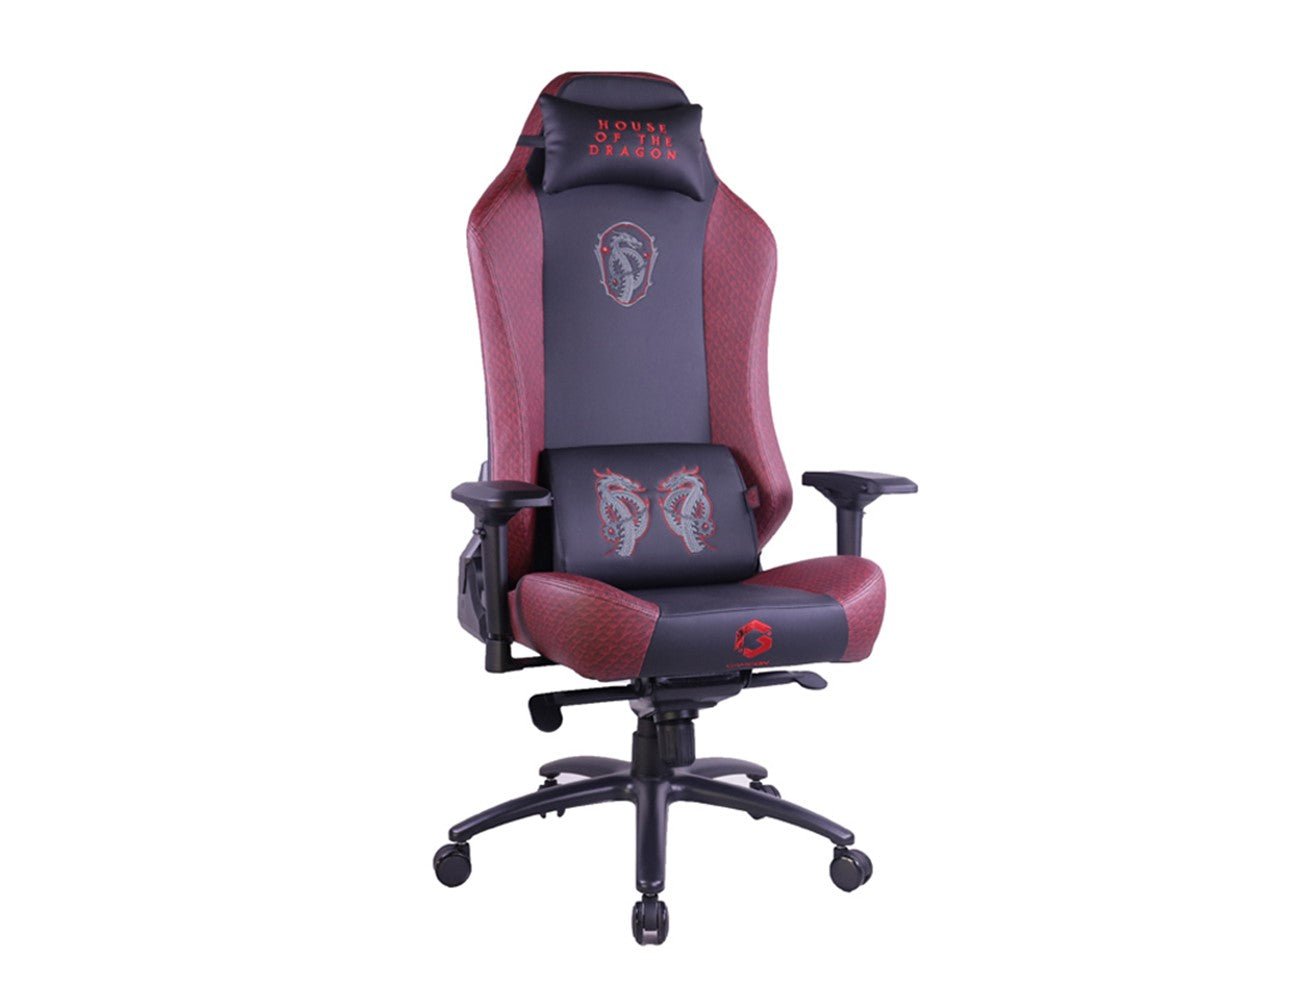 GameOn Licensed Gaming Chair With Adjustable 4D Armrest & Metal Base - House of The Dragons